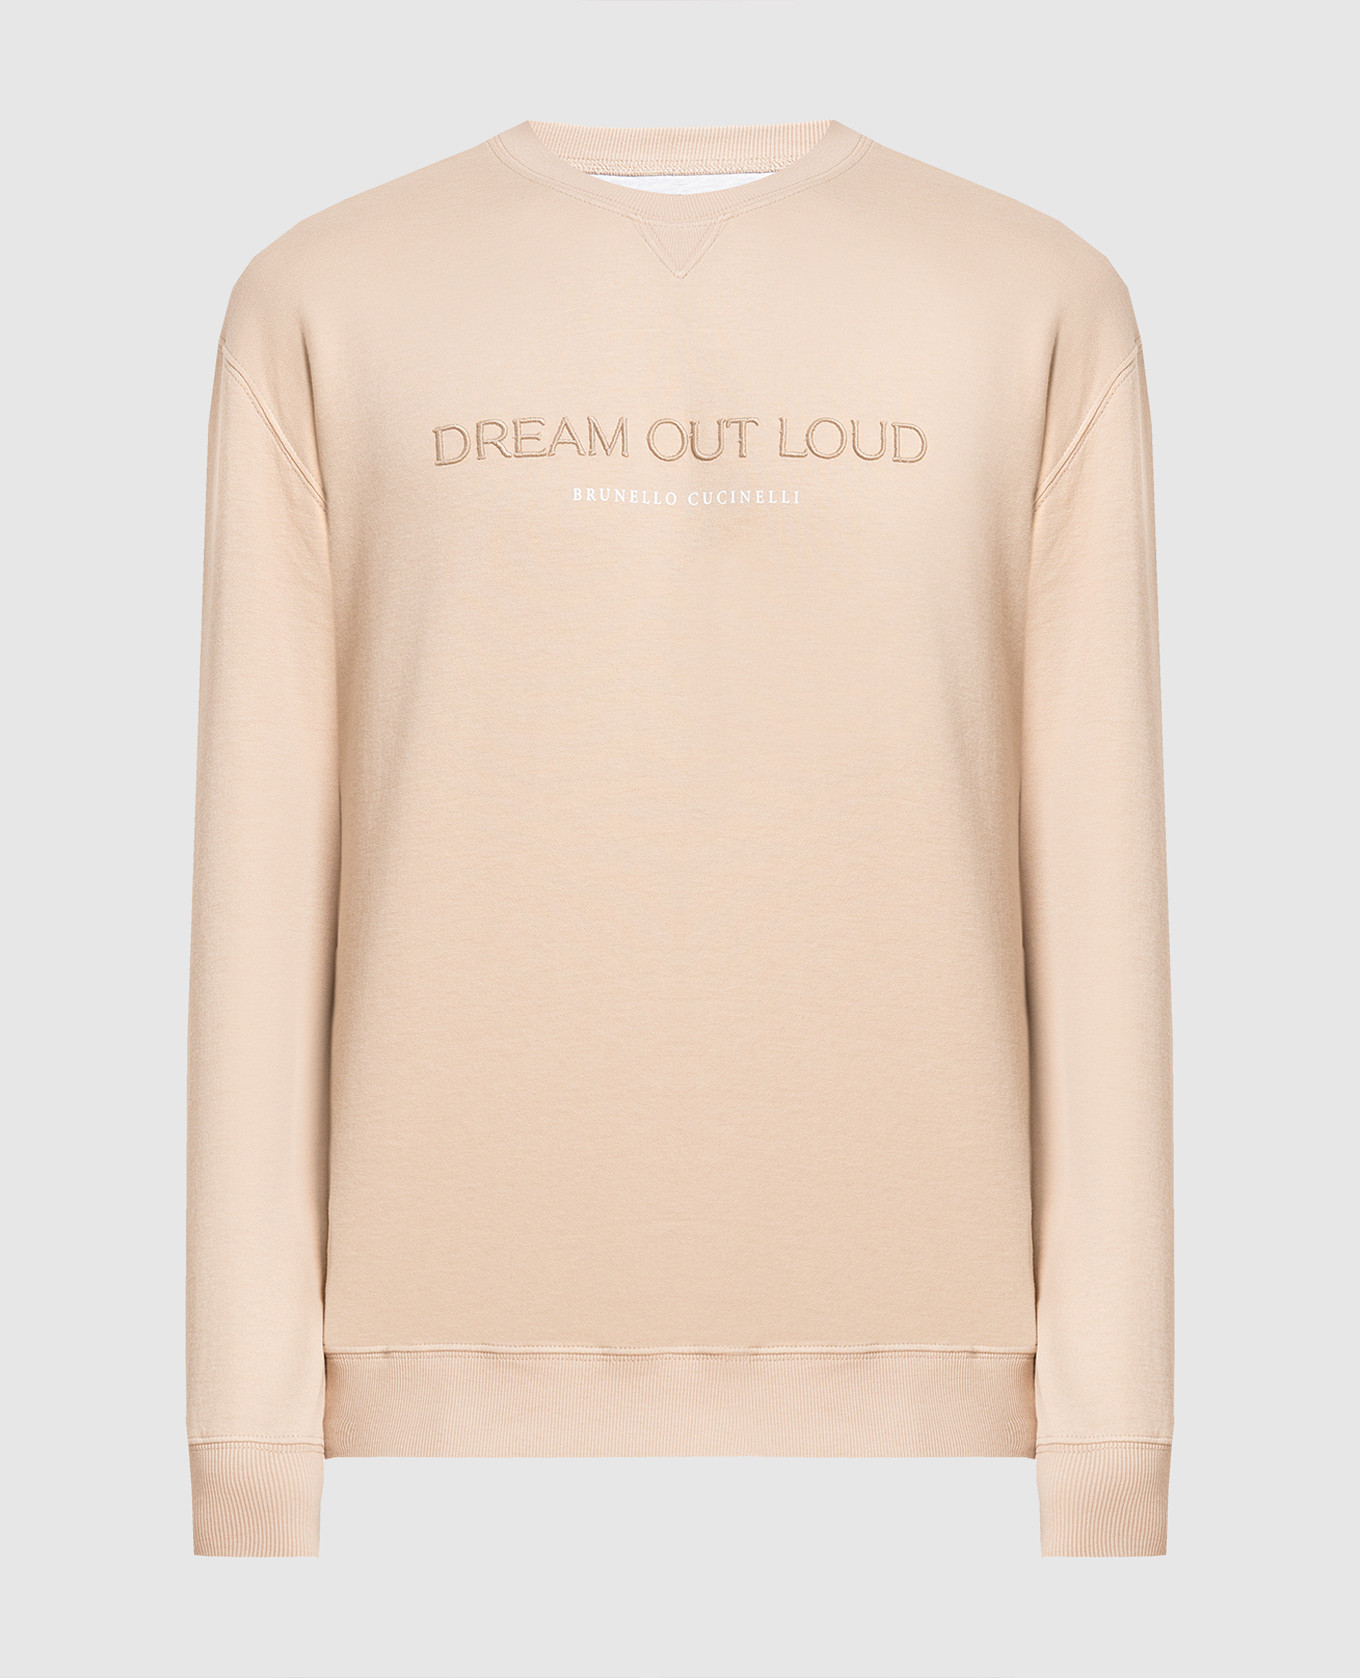 Beige sweatshirt with Dream out loud embroidery